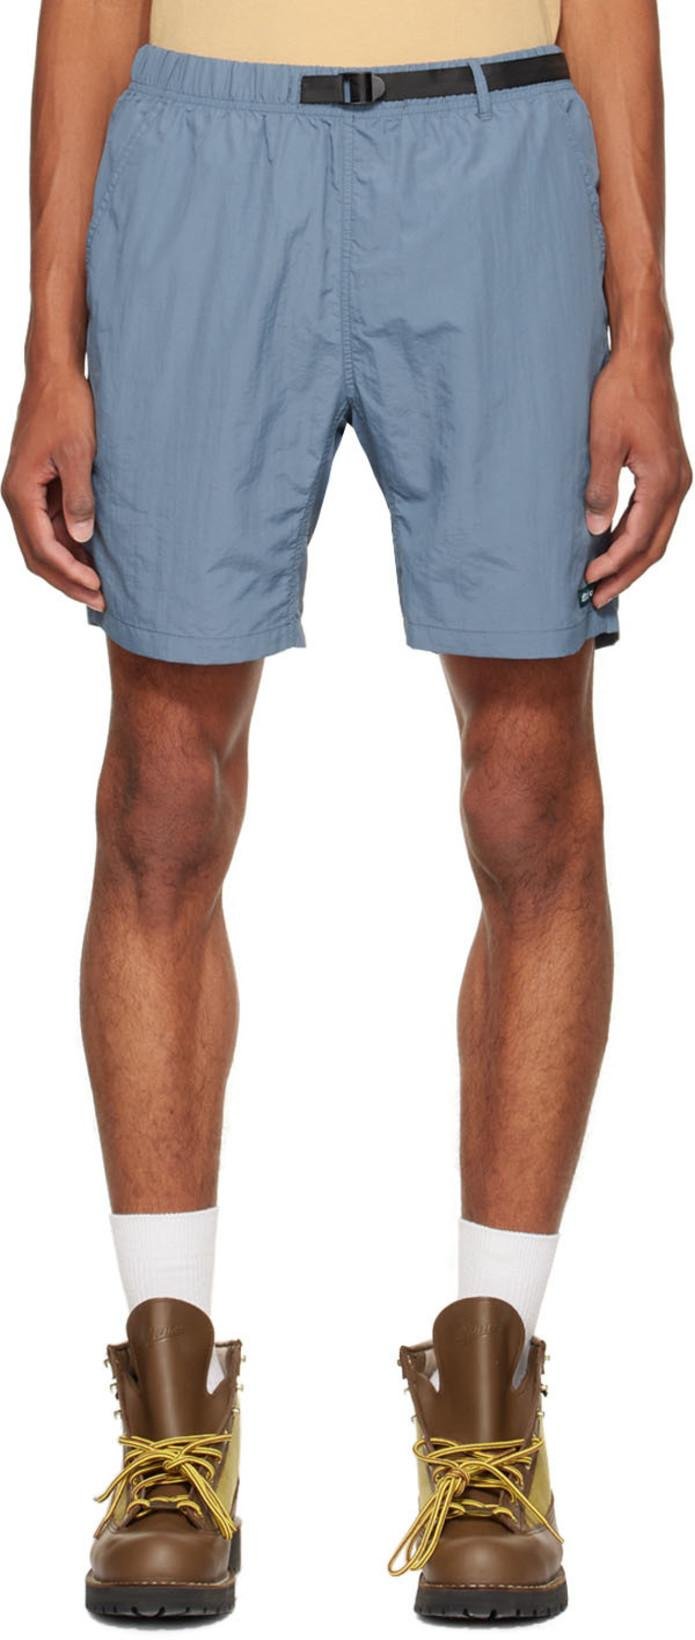 Blue Sierra Climbing Shorts by AFIELD OUT